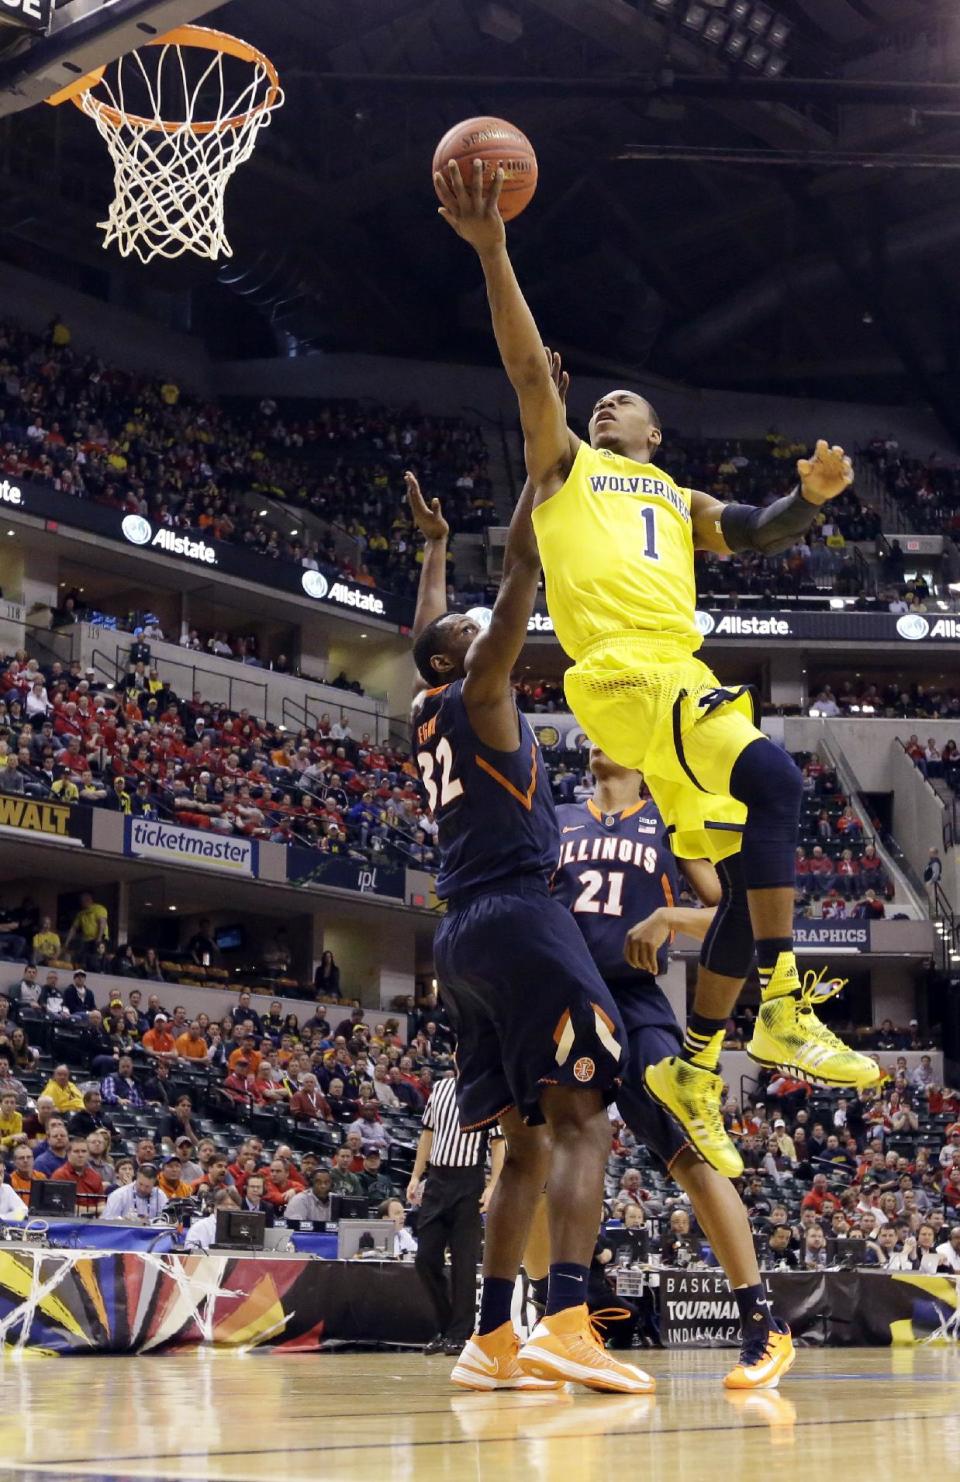 Michigan forward Glenn Robinson III (1) goes up for a basket against Illinois center Nnanna Egwu (32) in the first half of an NCAA college basketball game in the quarterfinals of the Big Ten Conference tournament Friday, March 14, 2014, in Indianapolis. (AP Photo/Michael Conroy)